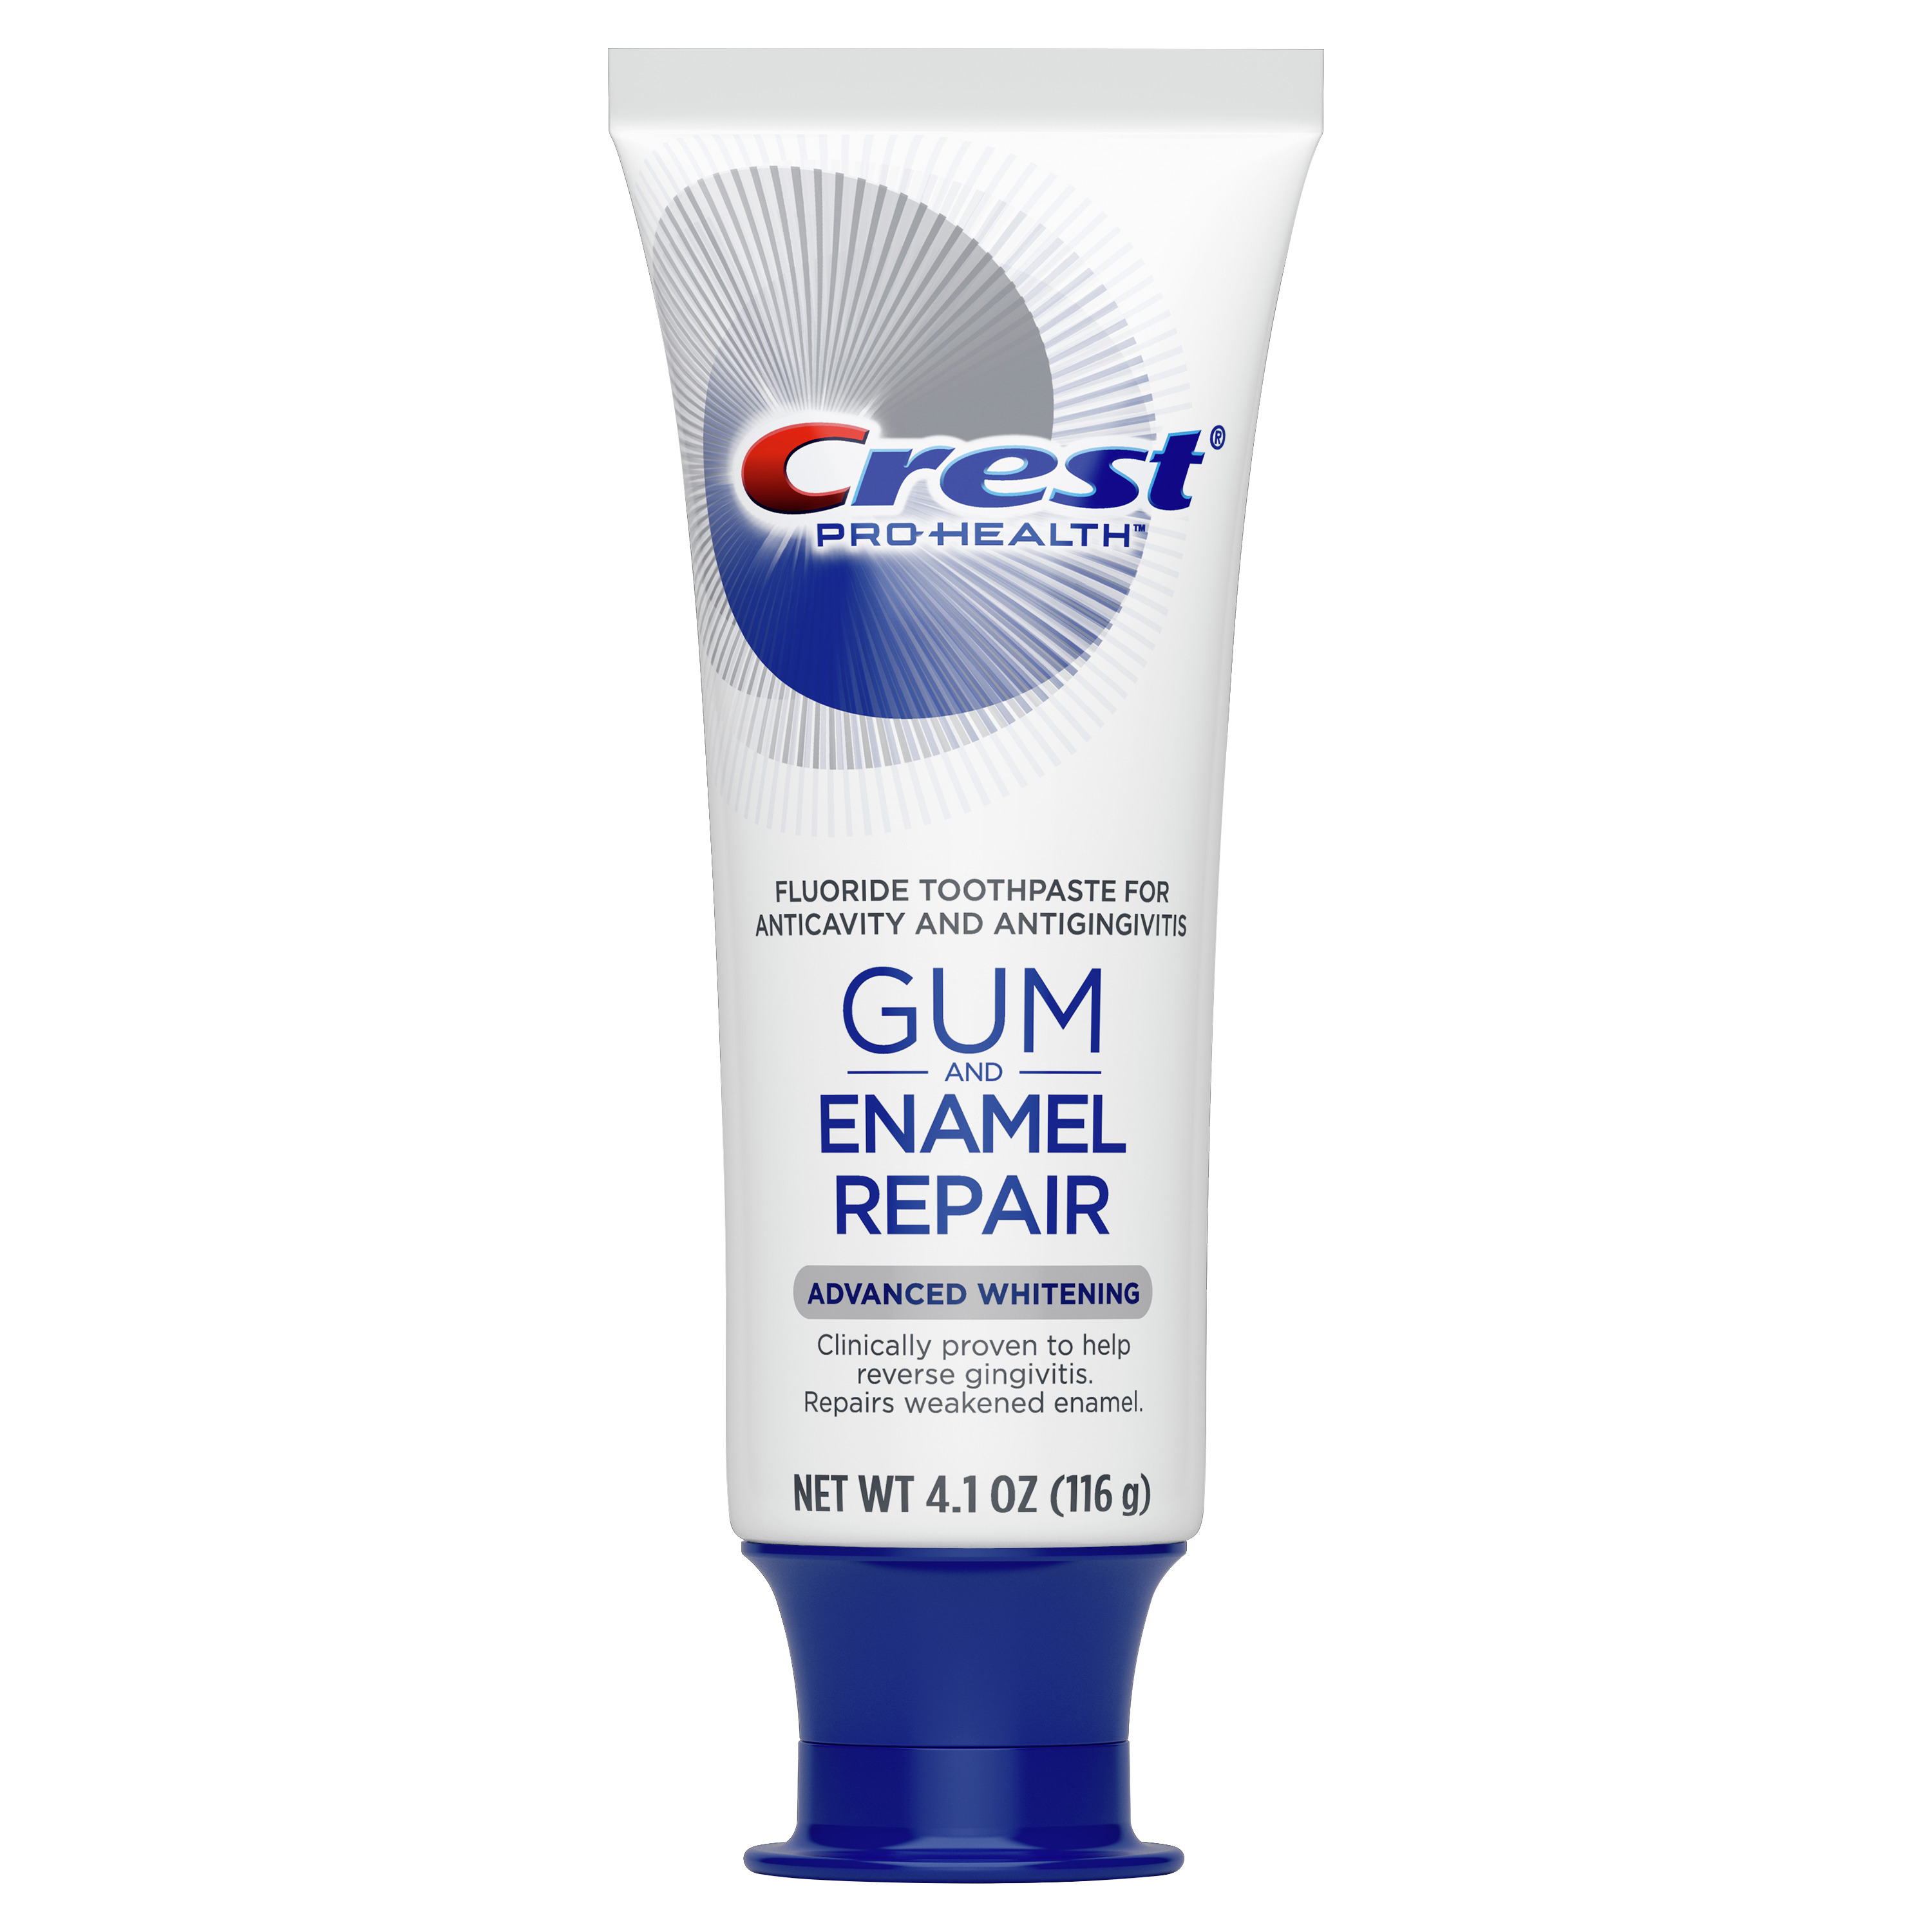 Crest Gum and Enamel Repair Toothpaste, Advanced Whitening, 4.1 oz - image 2 of 8